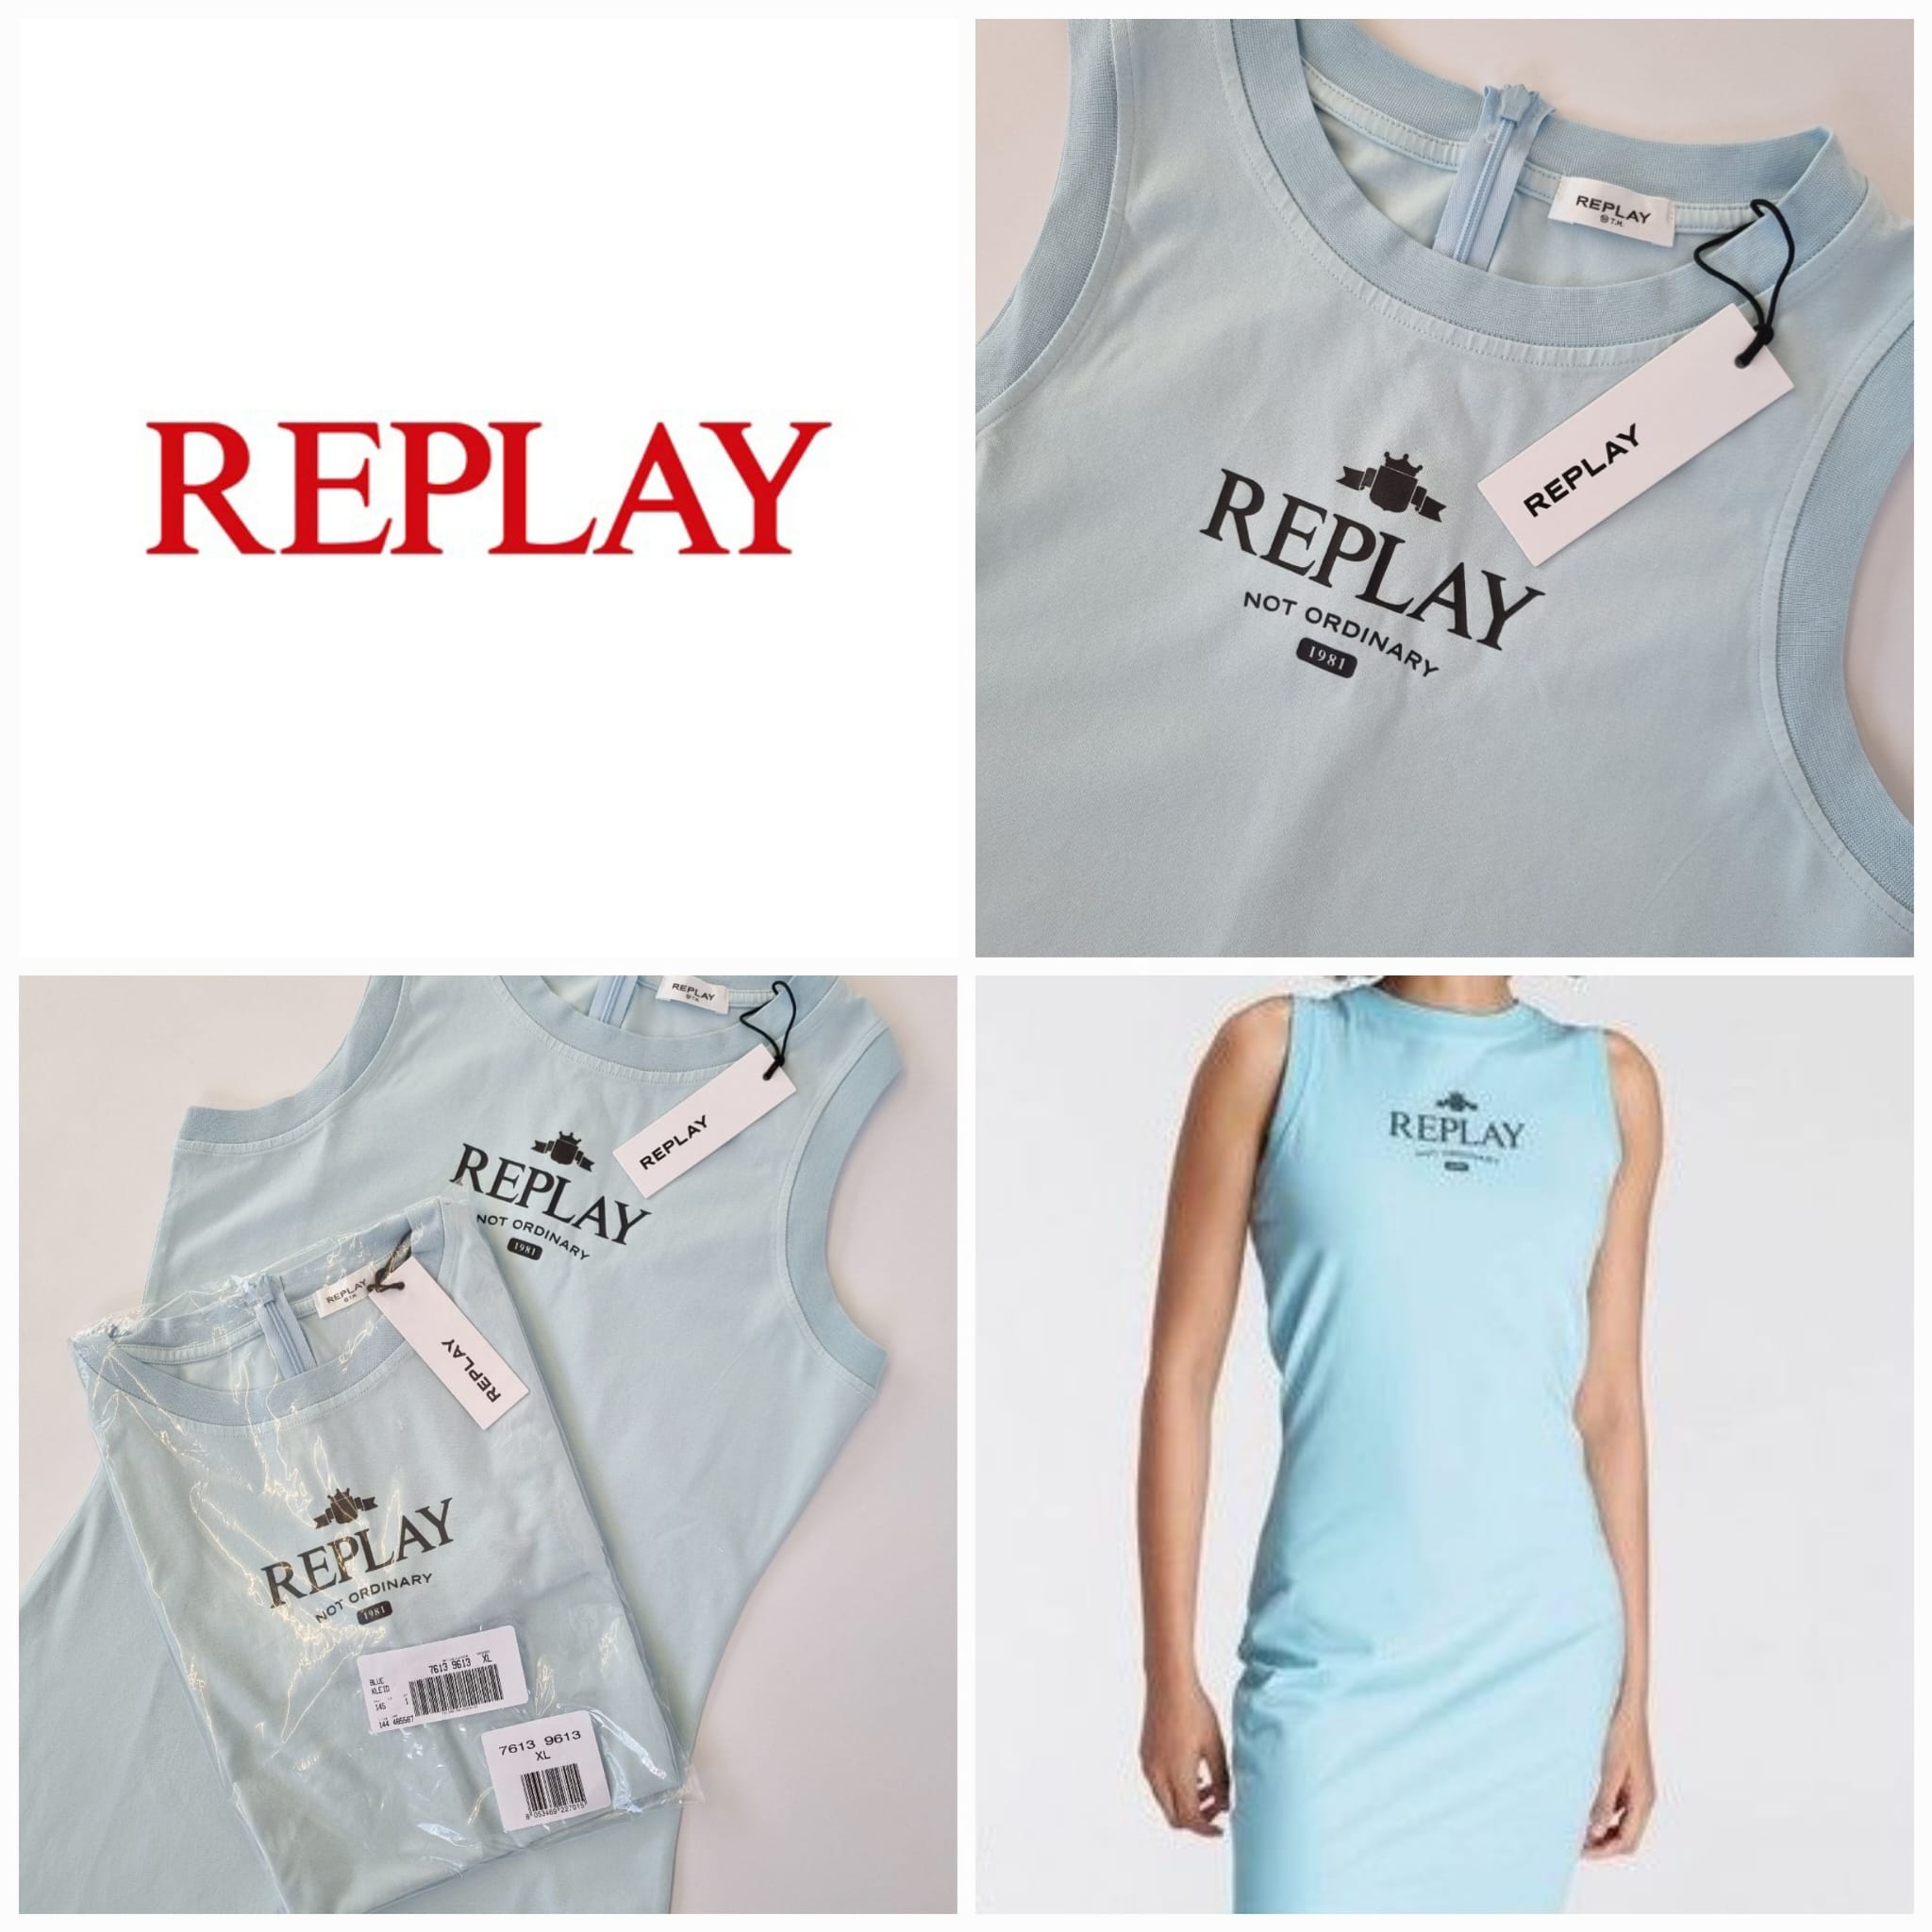 Women's sports dress from Replay